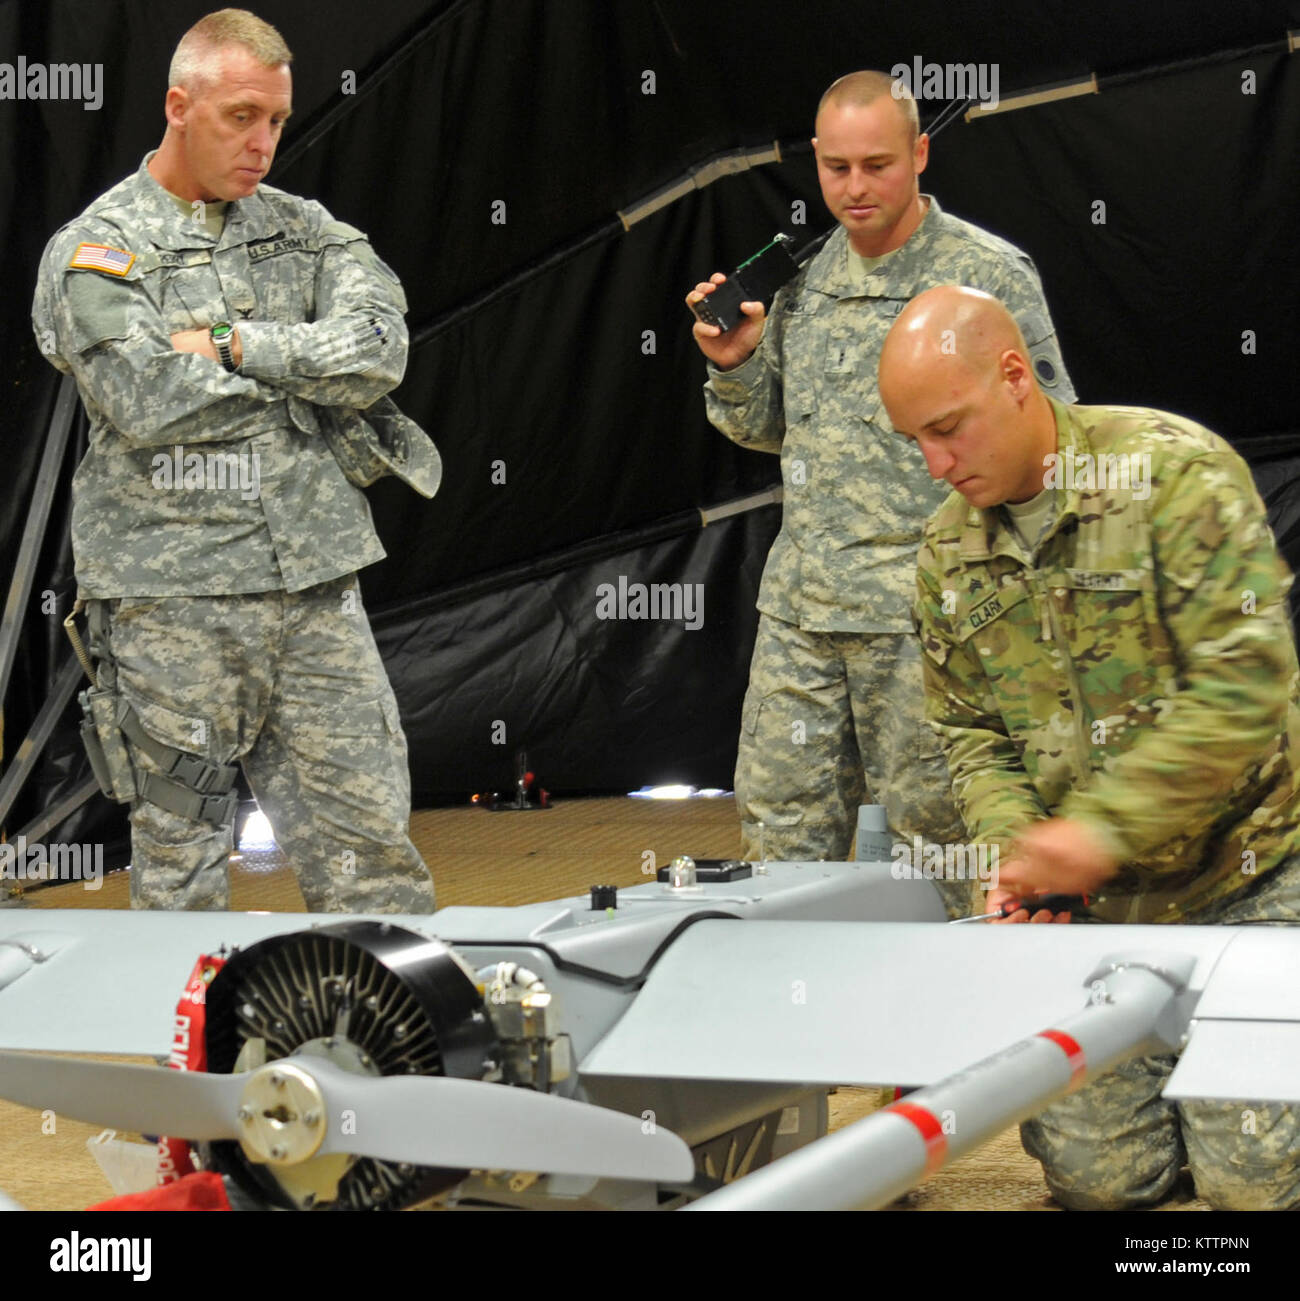 Col. James Perry, brigade commander for the 37th Infantry Brigade Combat Team observes Sgt. Sean Clark, unmanned aerial vehicle maintainer assigned to Headquarters and Headquarters Company, 37th IBCT, as Chief Warrant Officer 2 James P. Huck IV, UAV operator also assigned to HHC 37th IBCT, explains the Shadow 200 UAV's capabilities before a flight demonstration at Camp Shelby Joint Forces Training Center, Miss., Nov. 5, 2011. The UAV will be used by the 37th IBCT during their upcoming deployment to Afghanistan in support of Operation Enduring Freedom. (37th IBCT photo by Sgt. Kimberly Lamb) (R Stock Photo